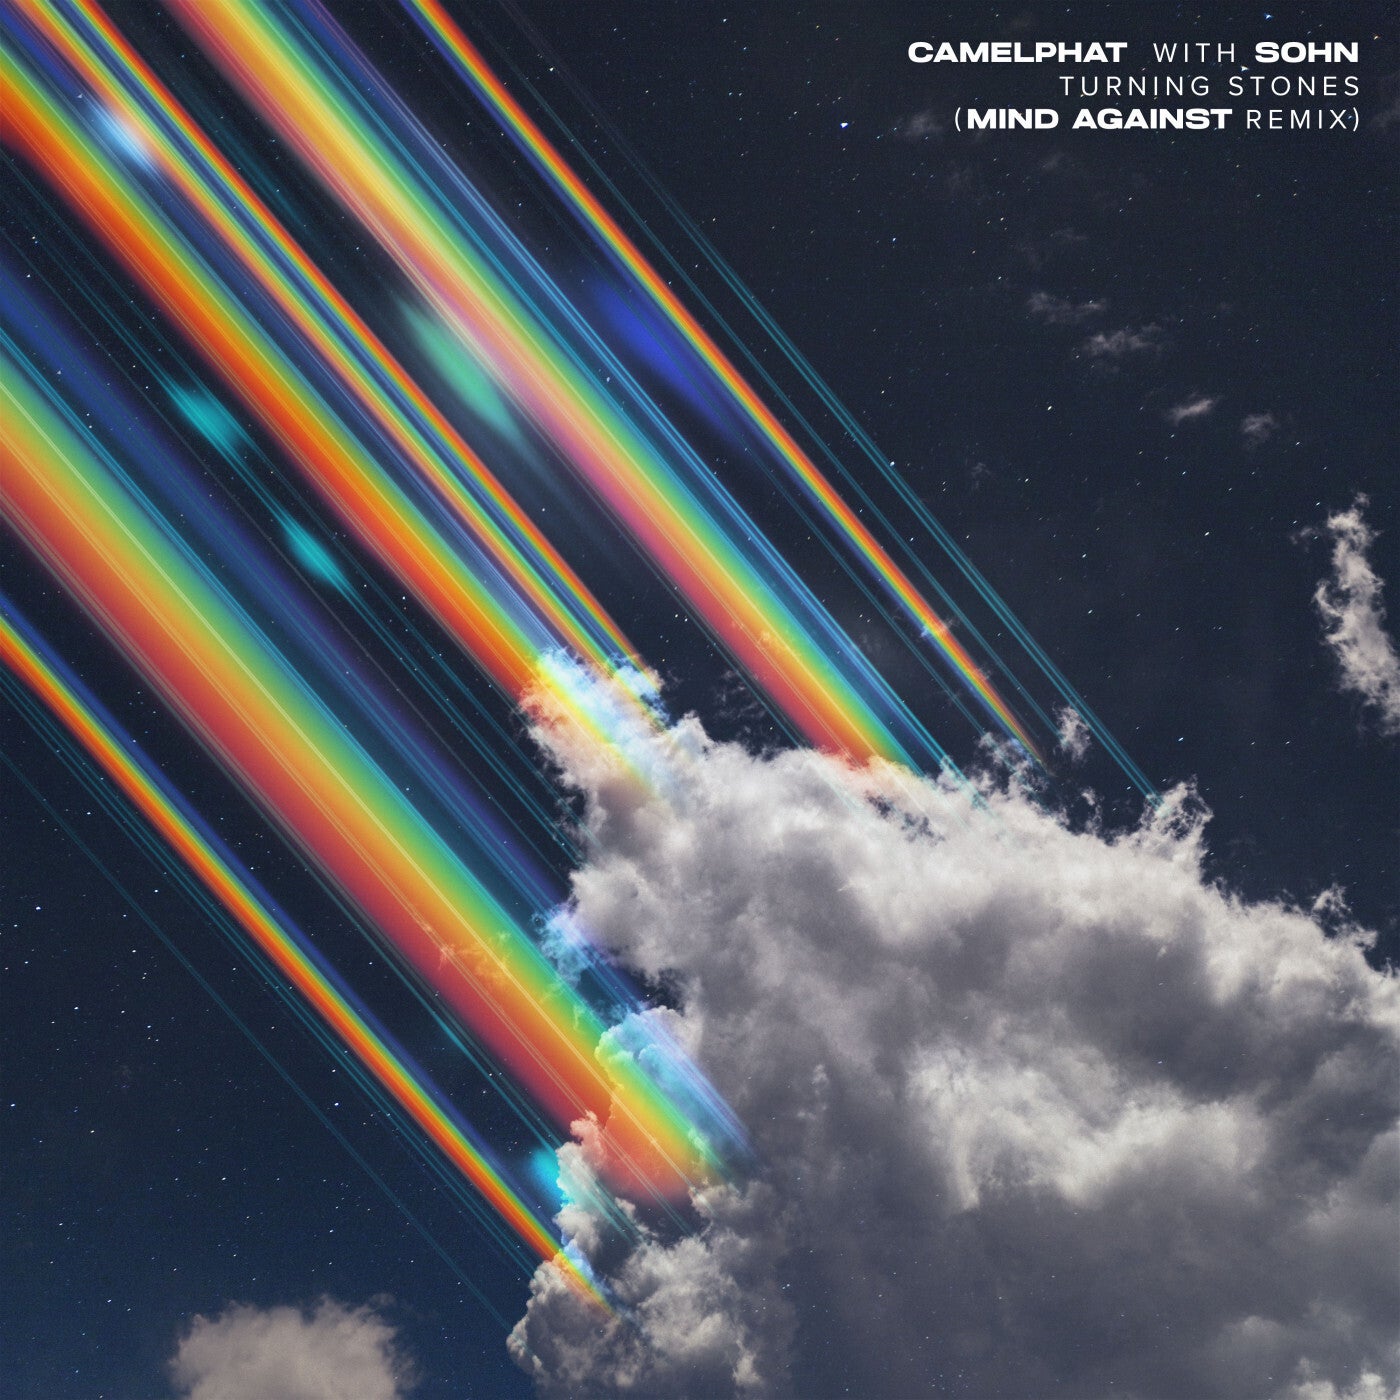 CamelPhat, SOHN - Turning Stones (Mind Against Remix) on When Stars Align / The Nations